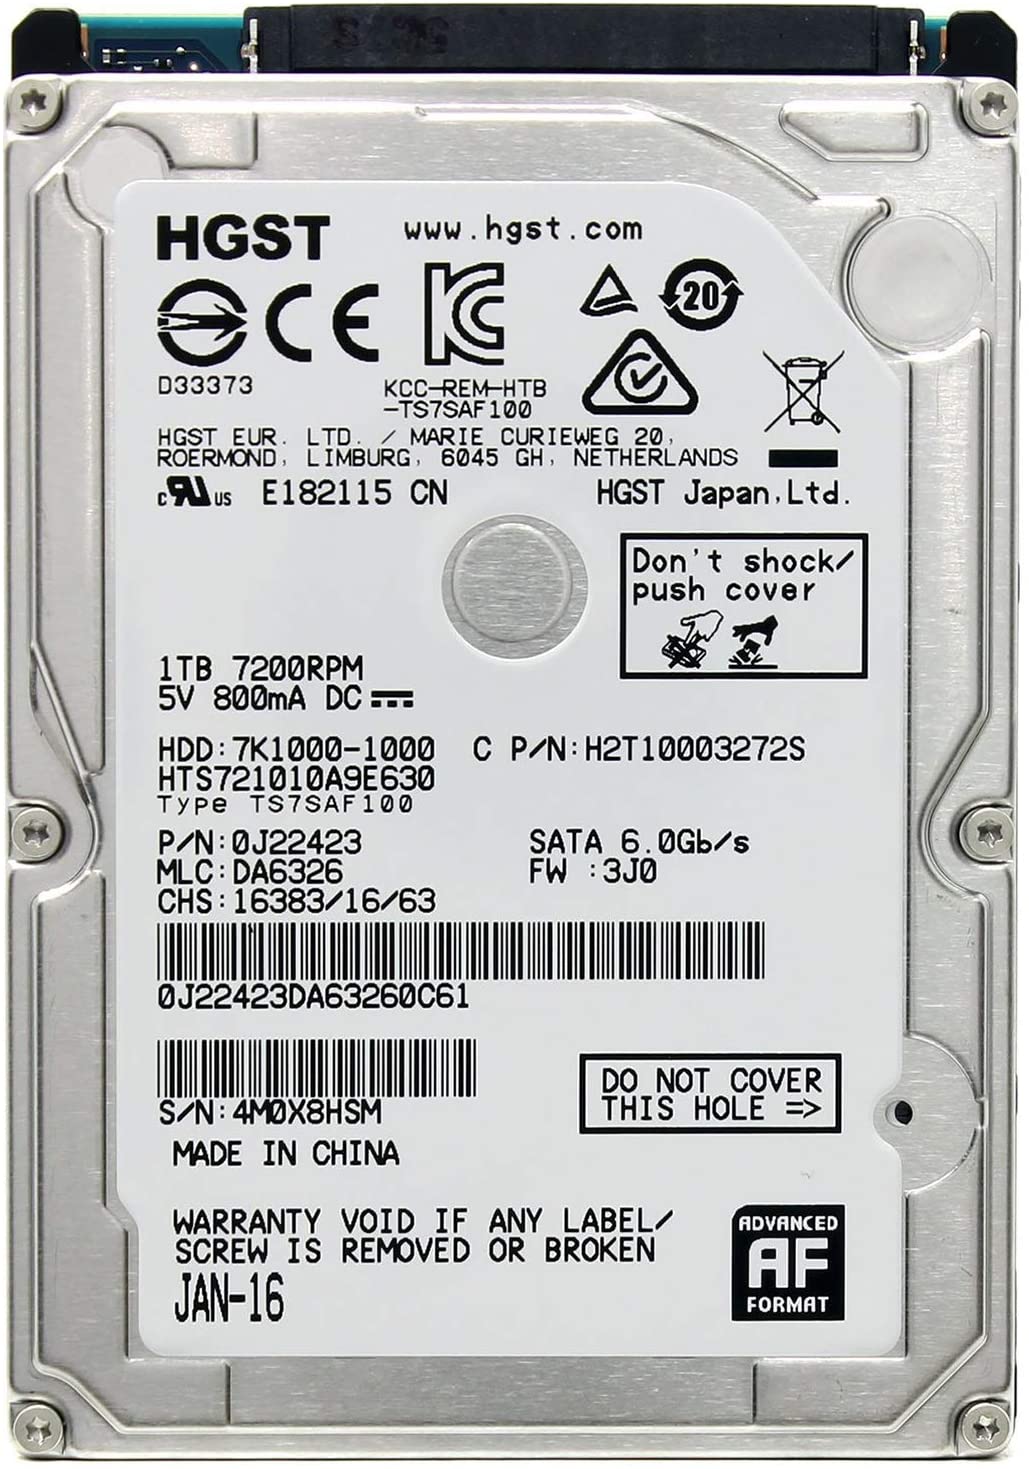 www.hgst.com/tech-support/for instructions on re-format for mac